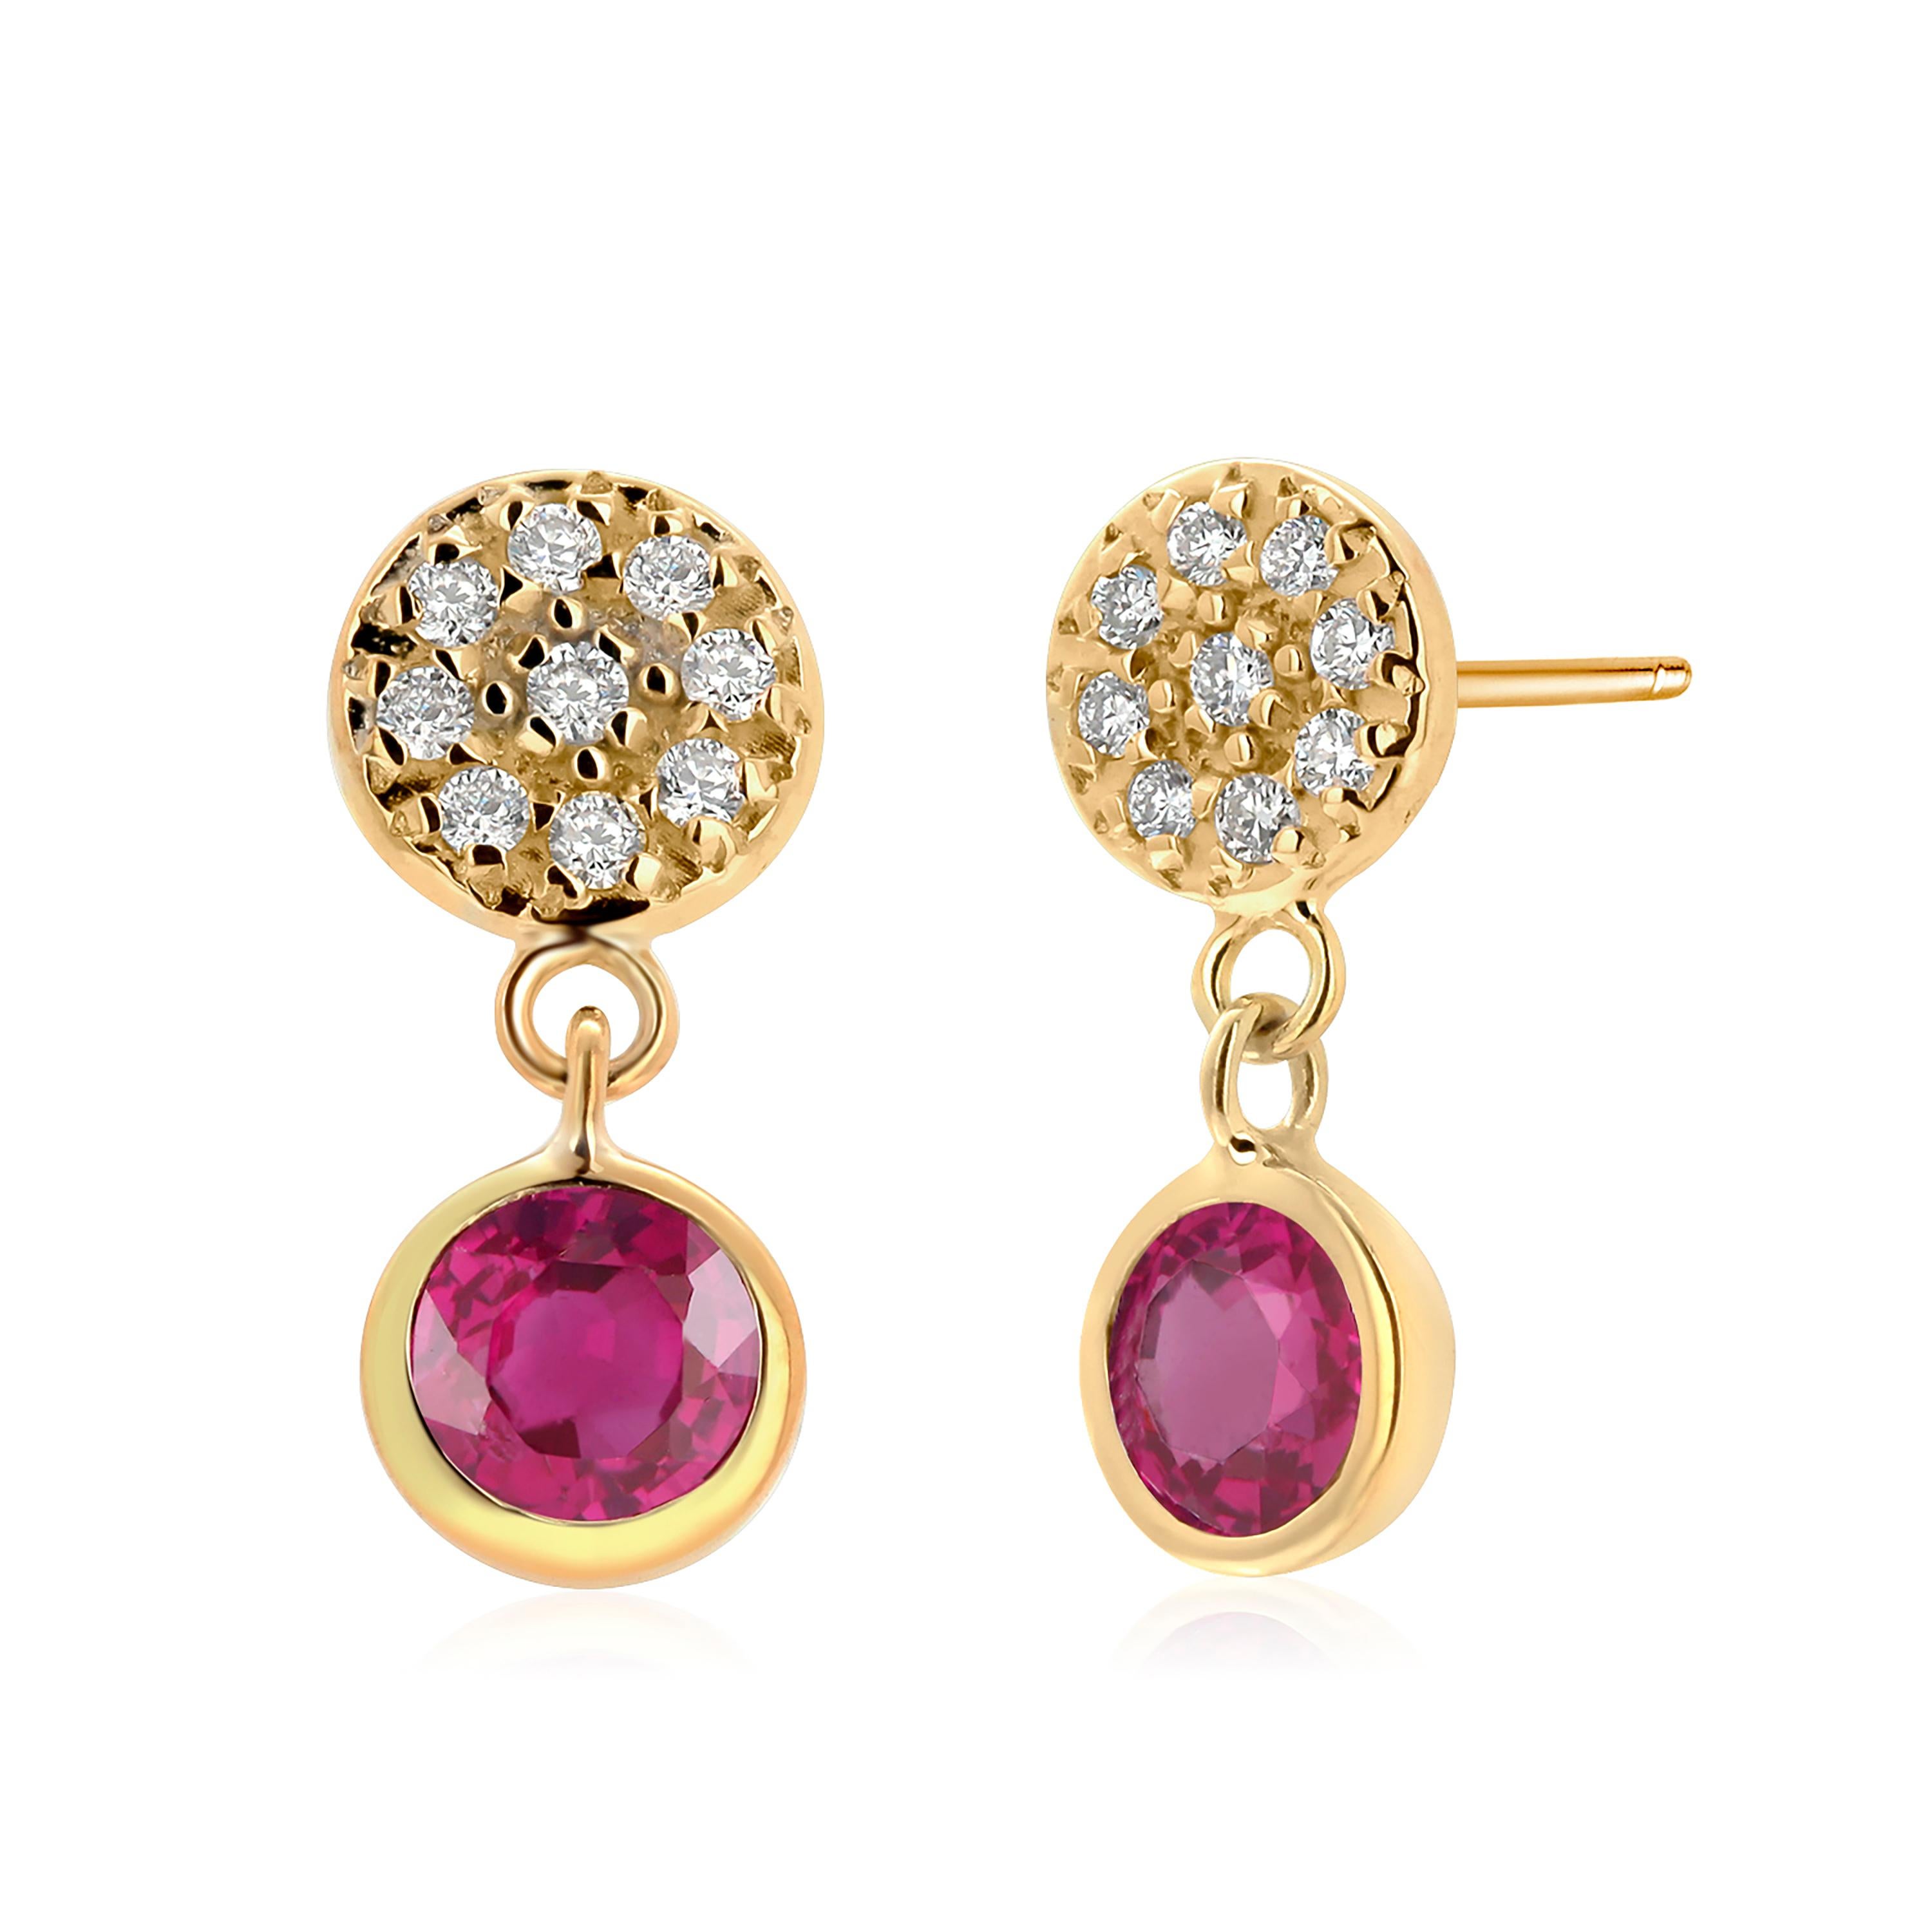 Round Cut Diamond Circles with Two Round Ruby Bezel Set Drop Earrings